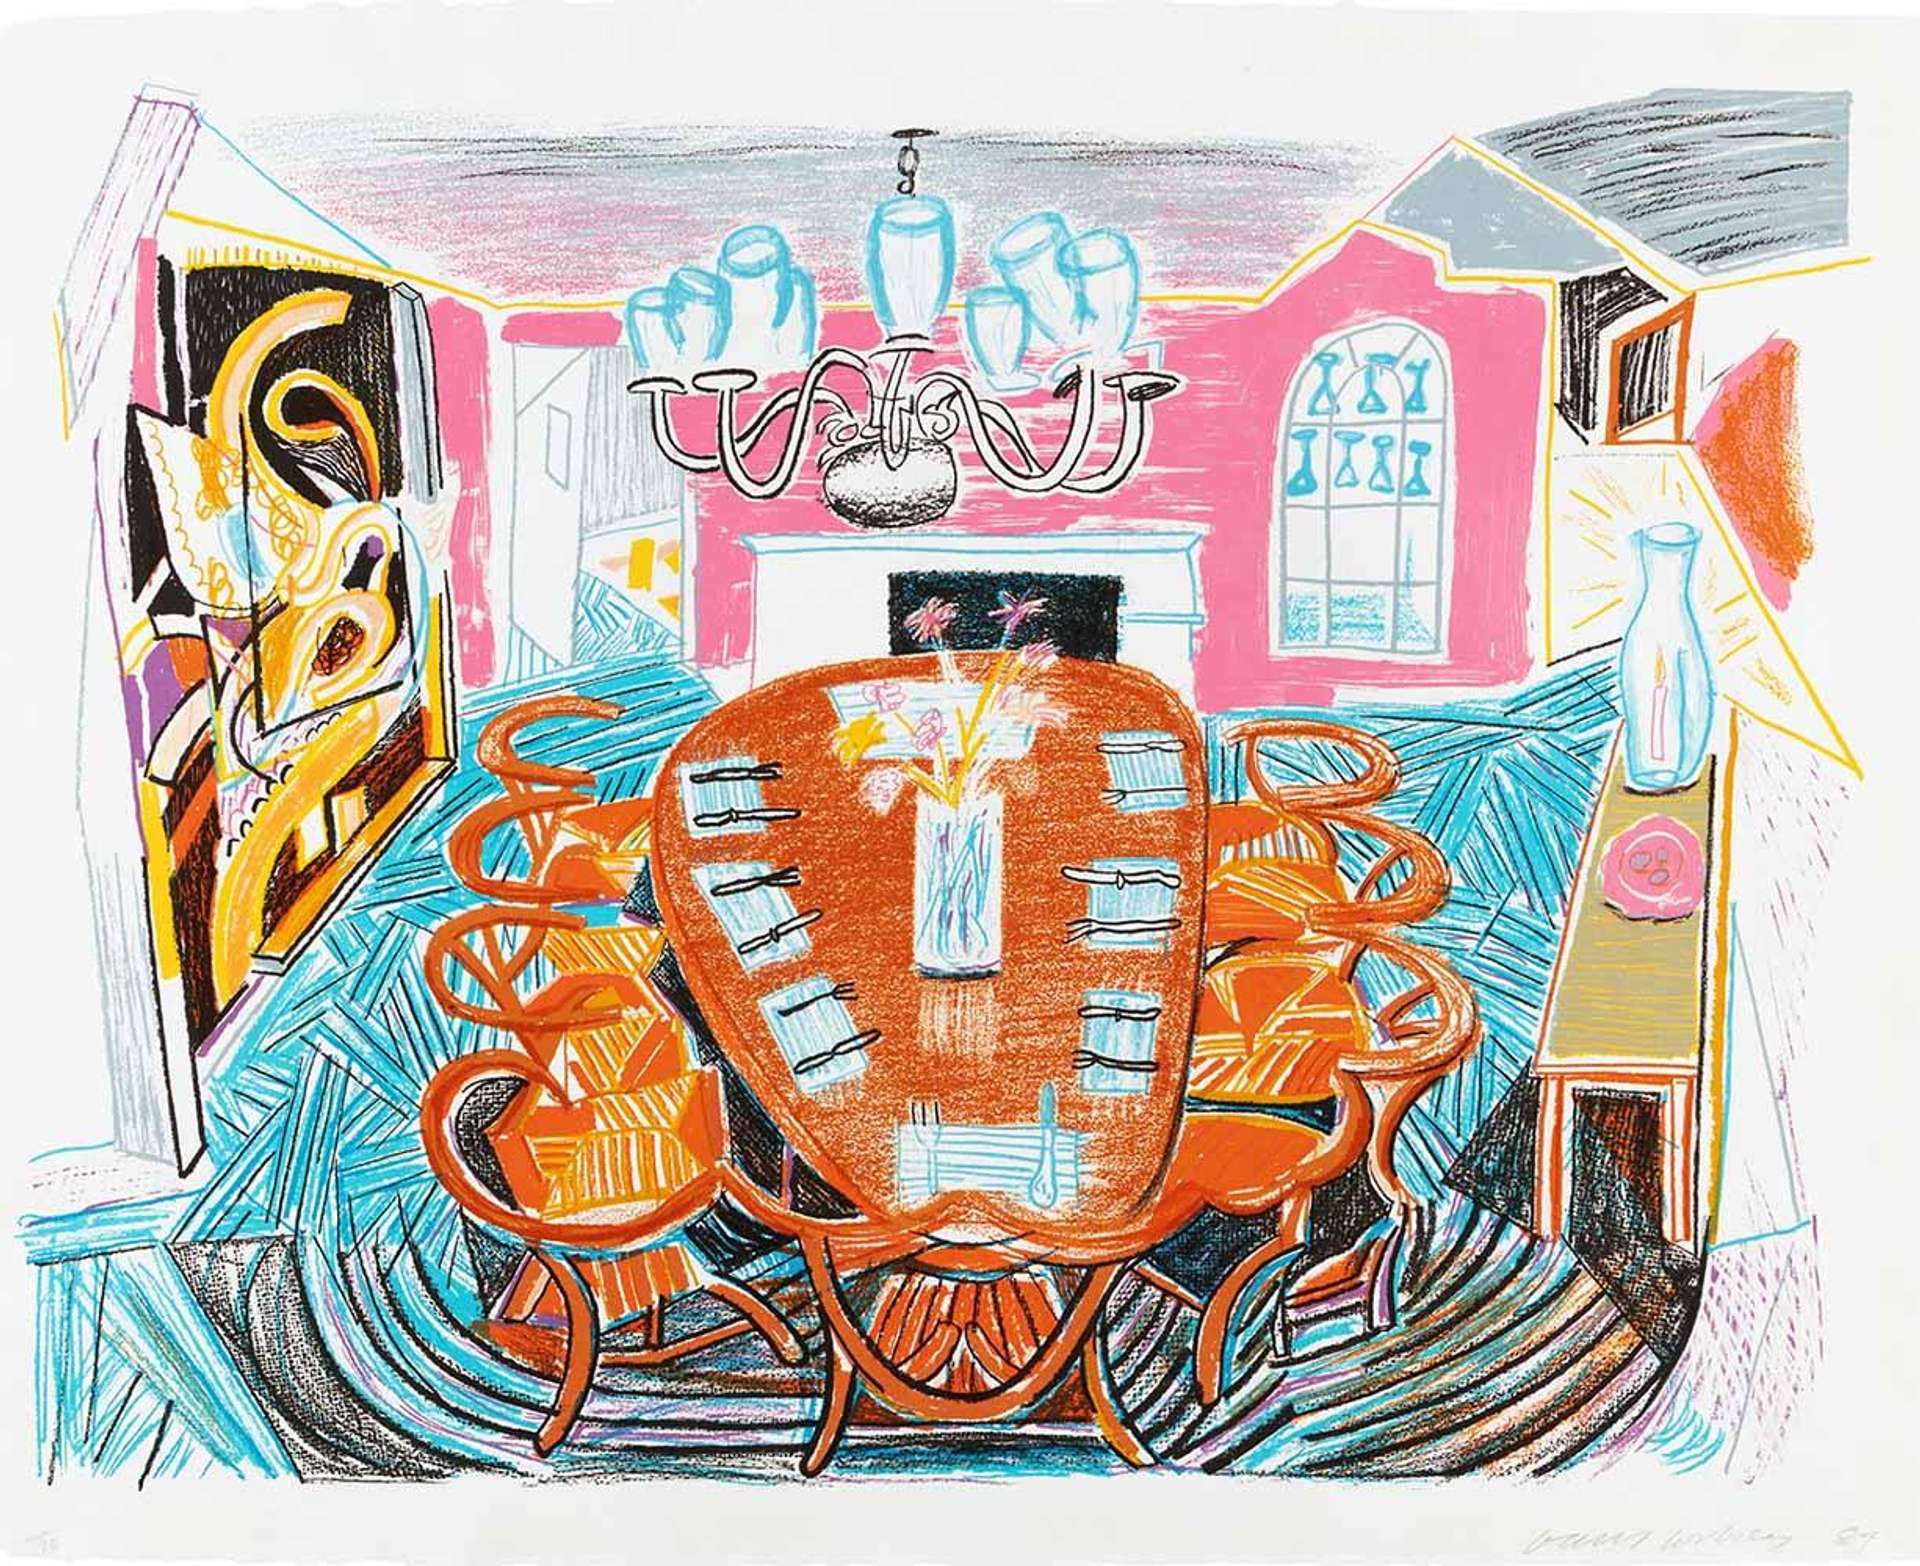 David Hockney’s Tyler Dining Room. A lithographic print of an interior dining room setting featuring light blue flooring, pink walls, a set dining table, fireplace and chandelier. 